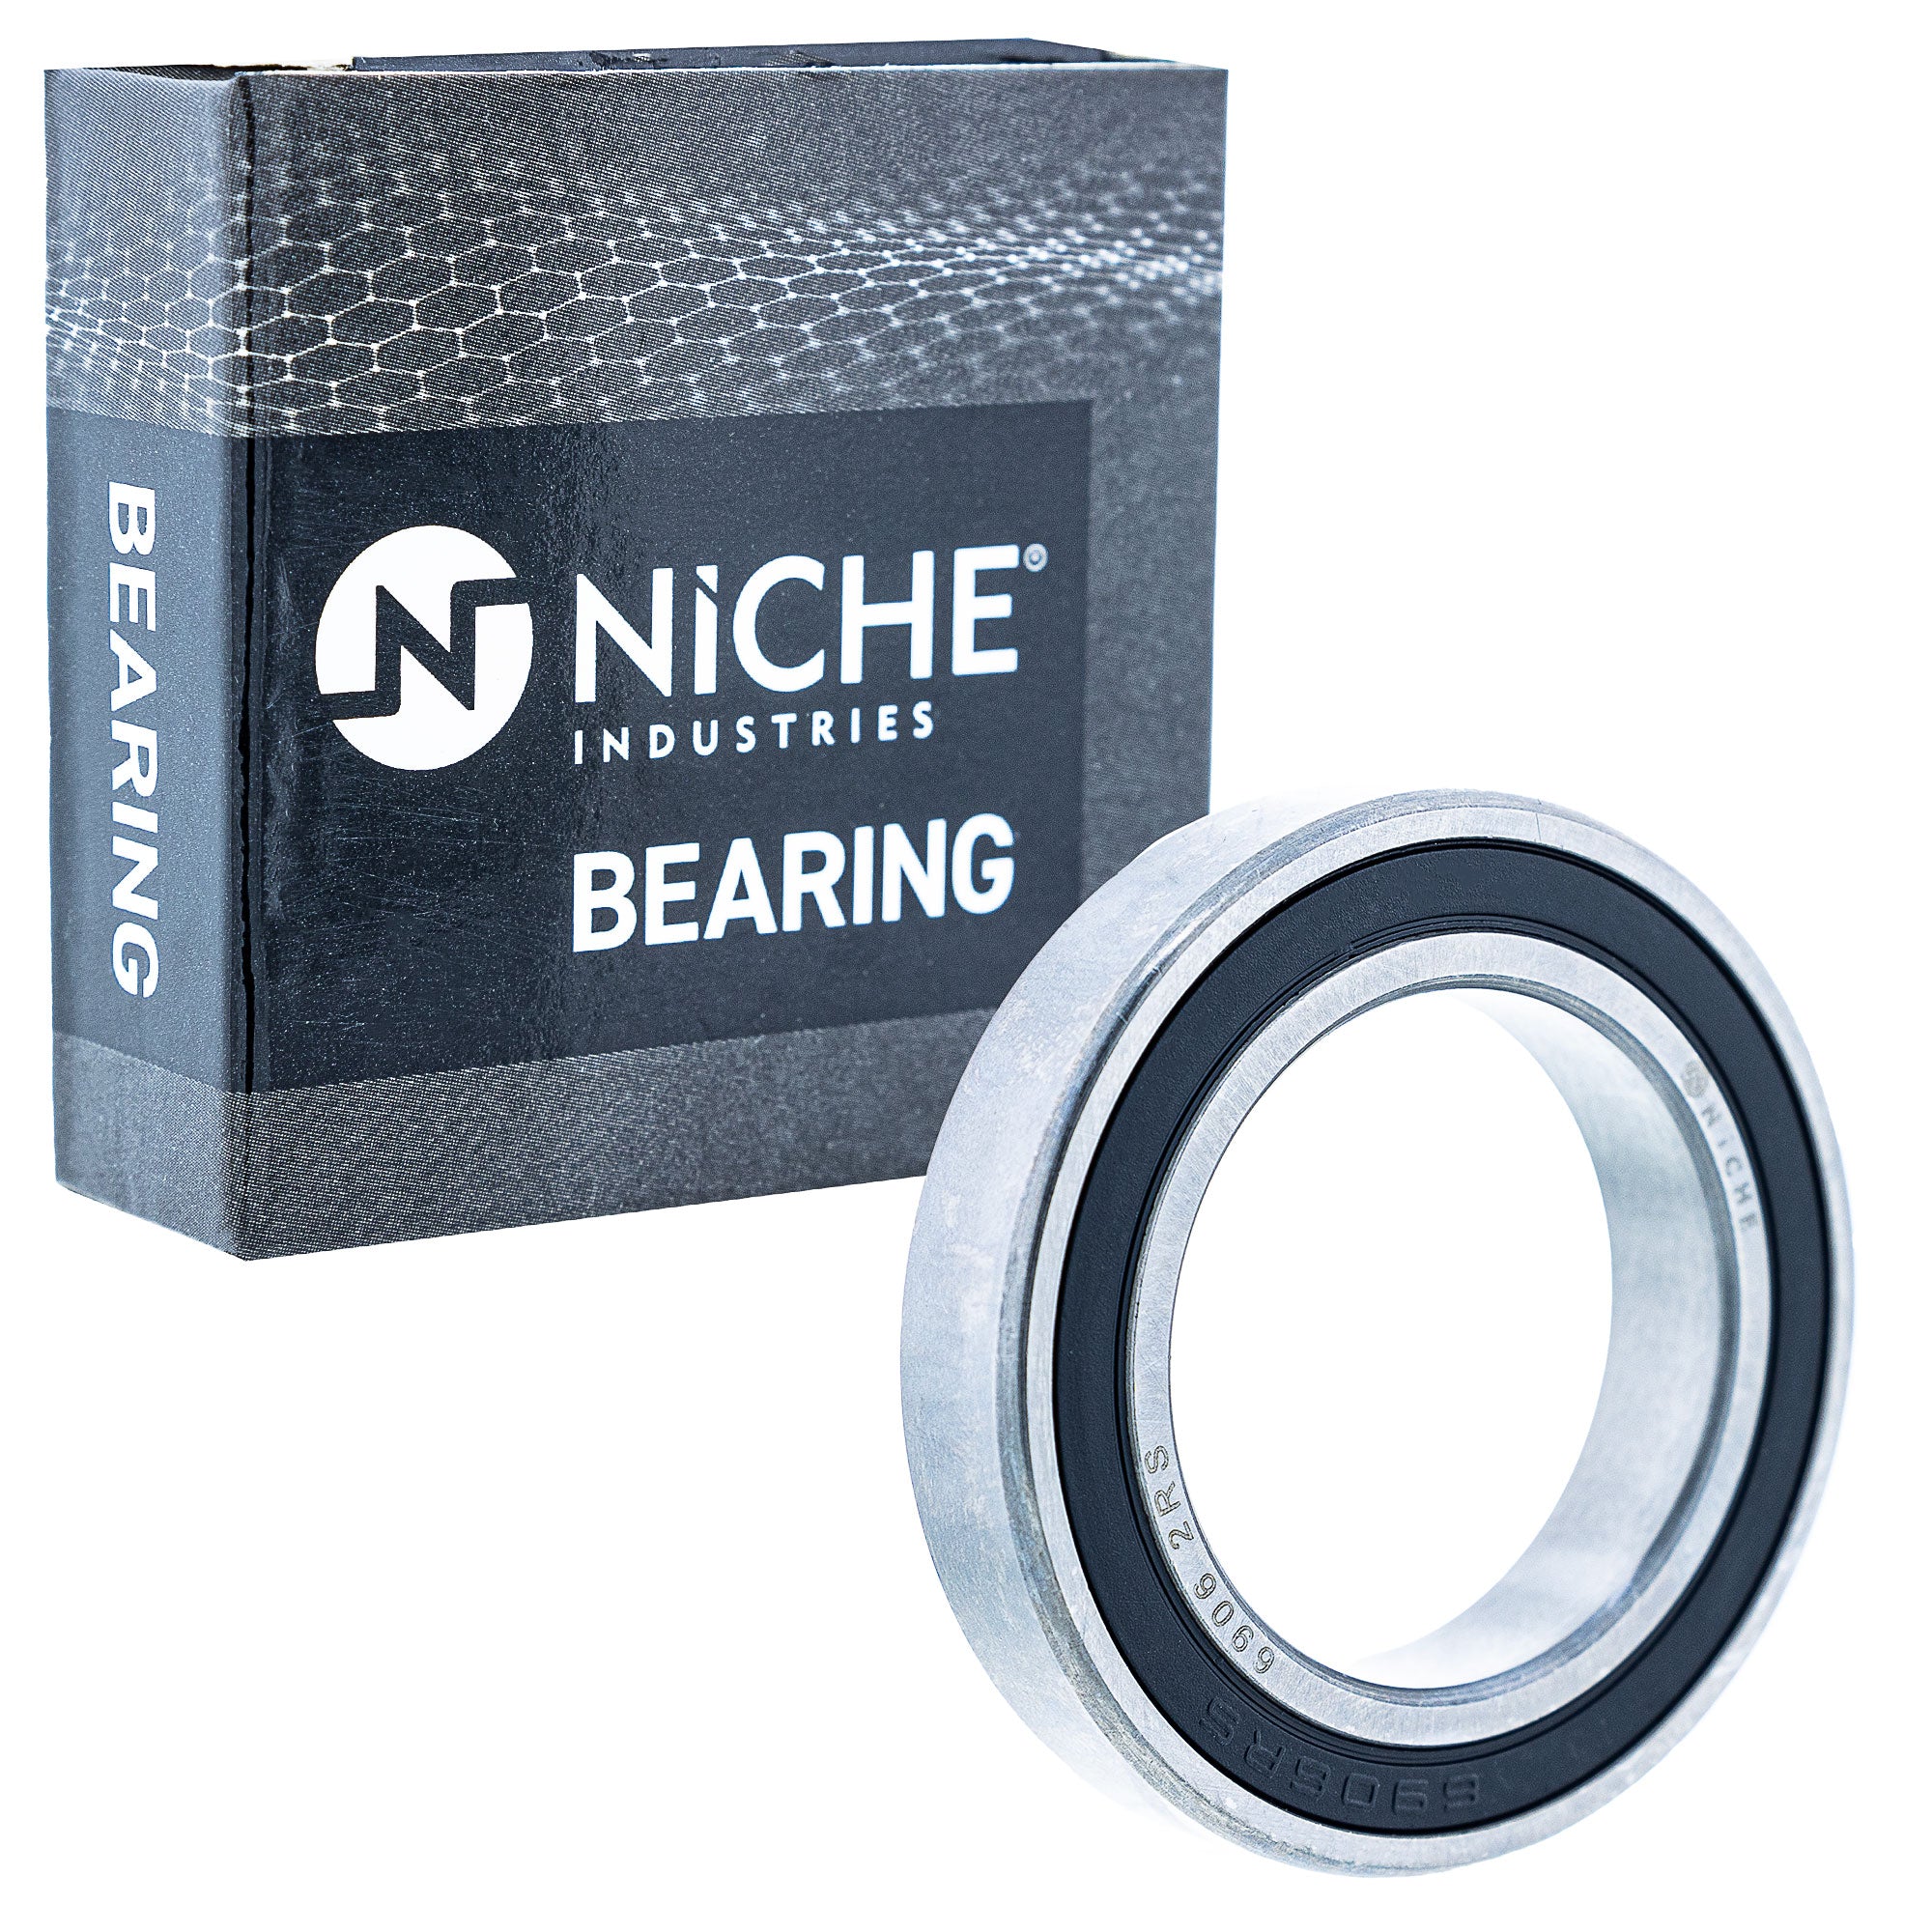 NICHE 519-CBB2250R Bearing & Seal Kit 10-Pack for zOTHER